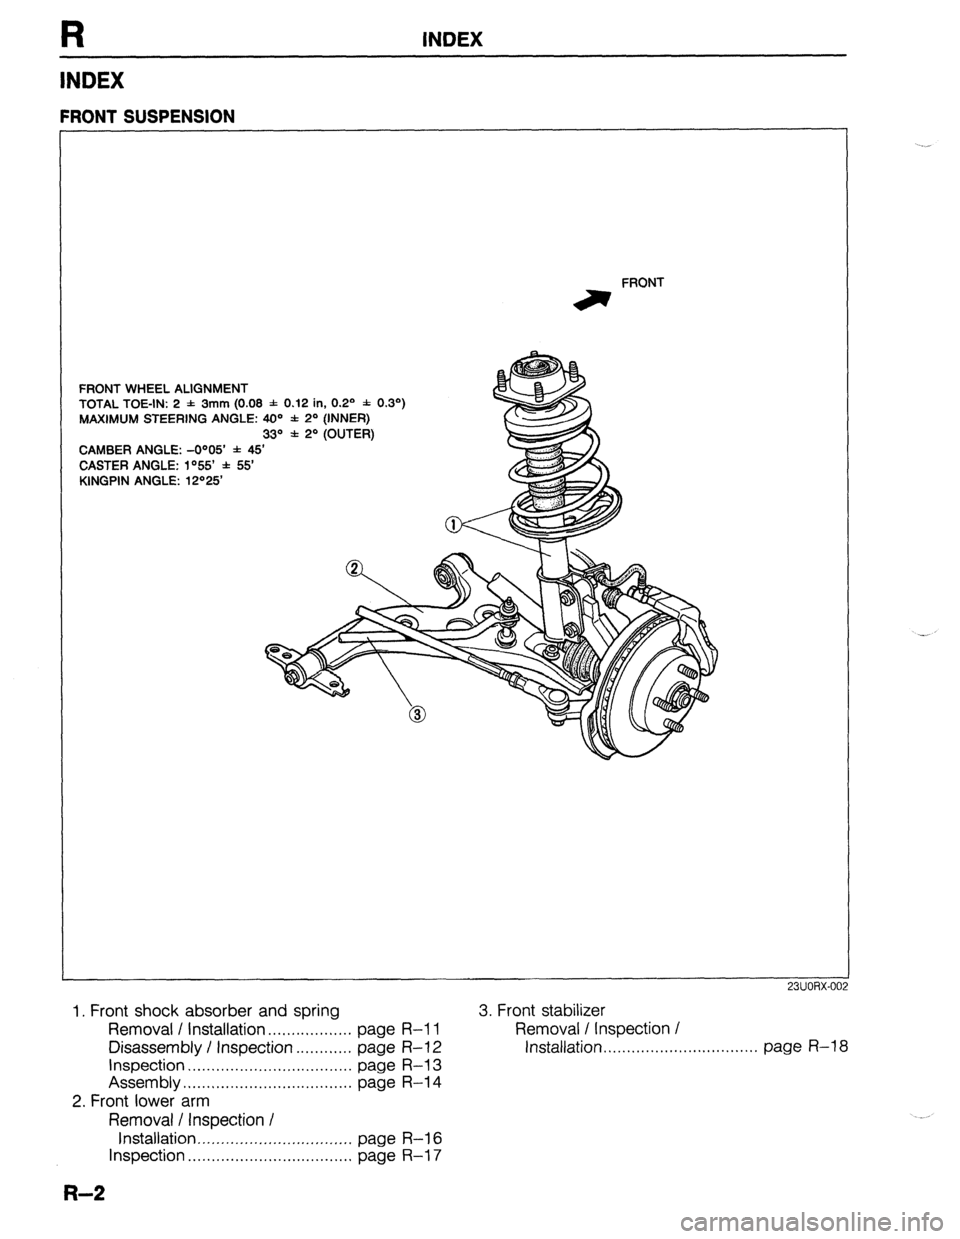 MAZDA 323 1989  Factory Repair Manual R INDEX 
INDEX 
FRONT WHEEL ALIGNMENT 
TOTAL TOE-IN: 2 -1: 3mm (0.08 f 0.12 in, 0.2’ * 0.3’) 
MAXIMUM STEERING ANGLE: 40=’ * 2’ (INNER) 
33“ f 2O (OUTER) 
CAMBER ANGLE: -O”05’ * 45’ 
C